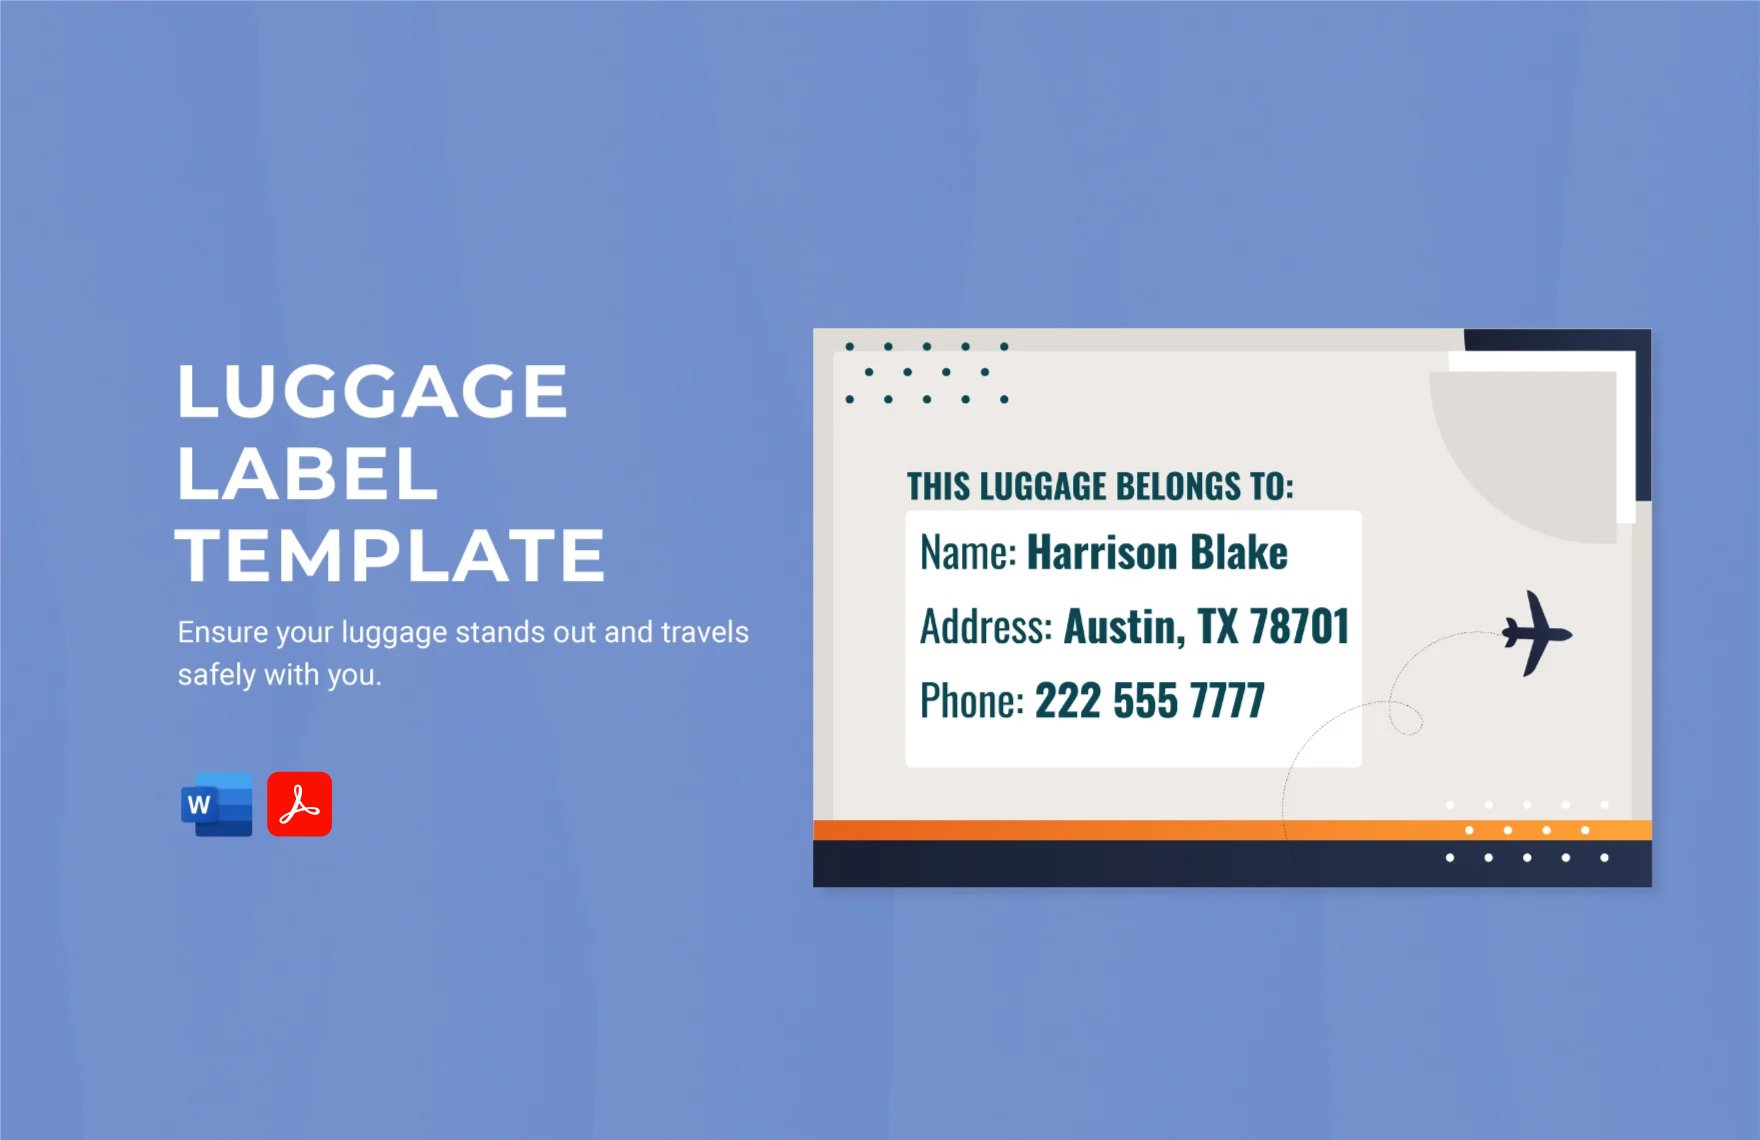 Luggage Label Template in Word, PDF